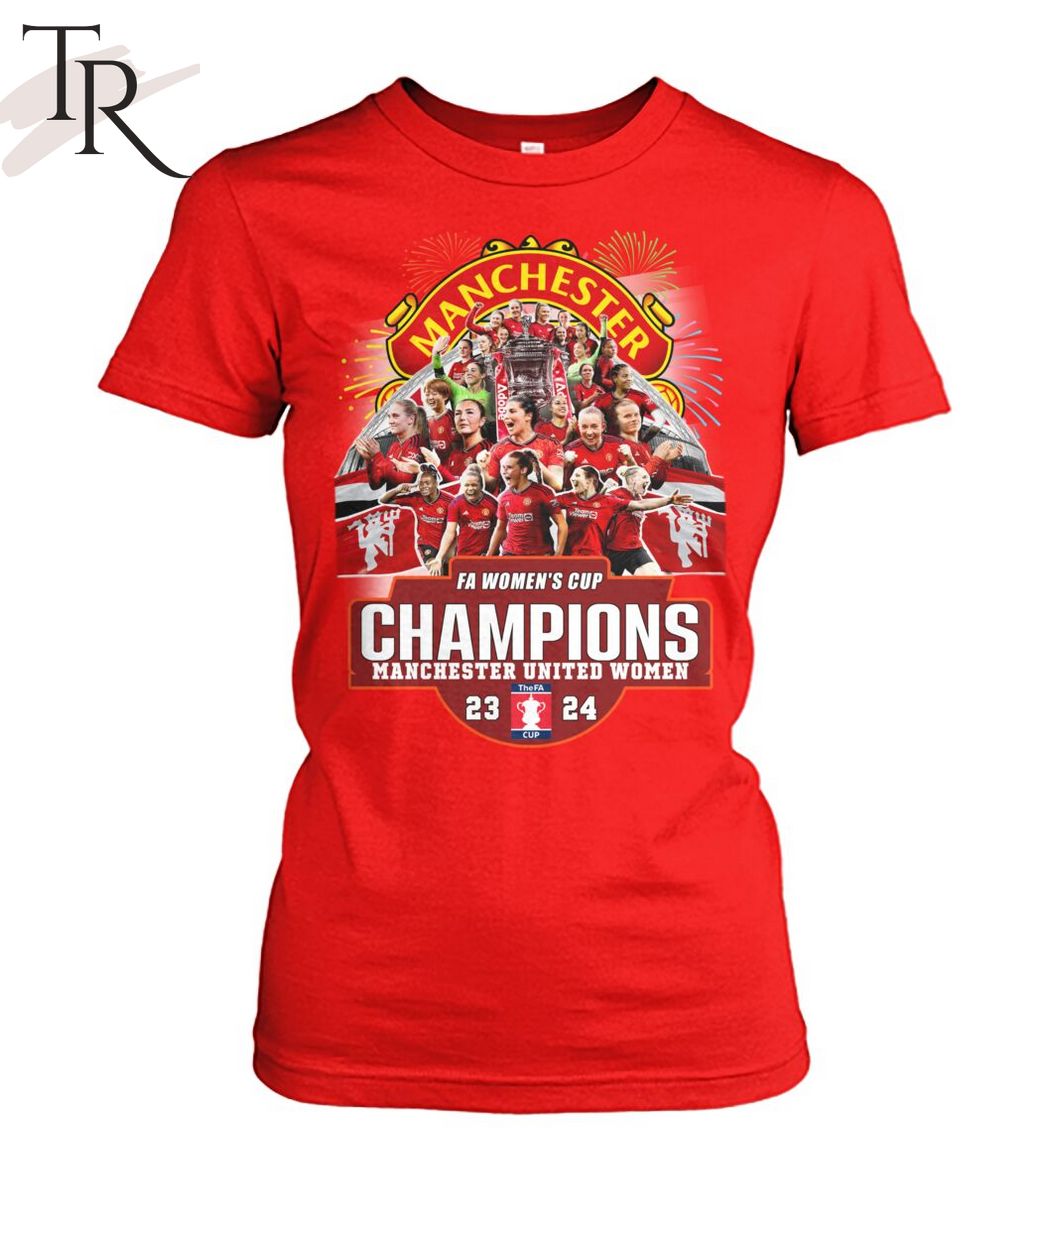 FA Women's Cup Champions Manchester United Women 23-24 T-Shirt